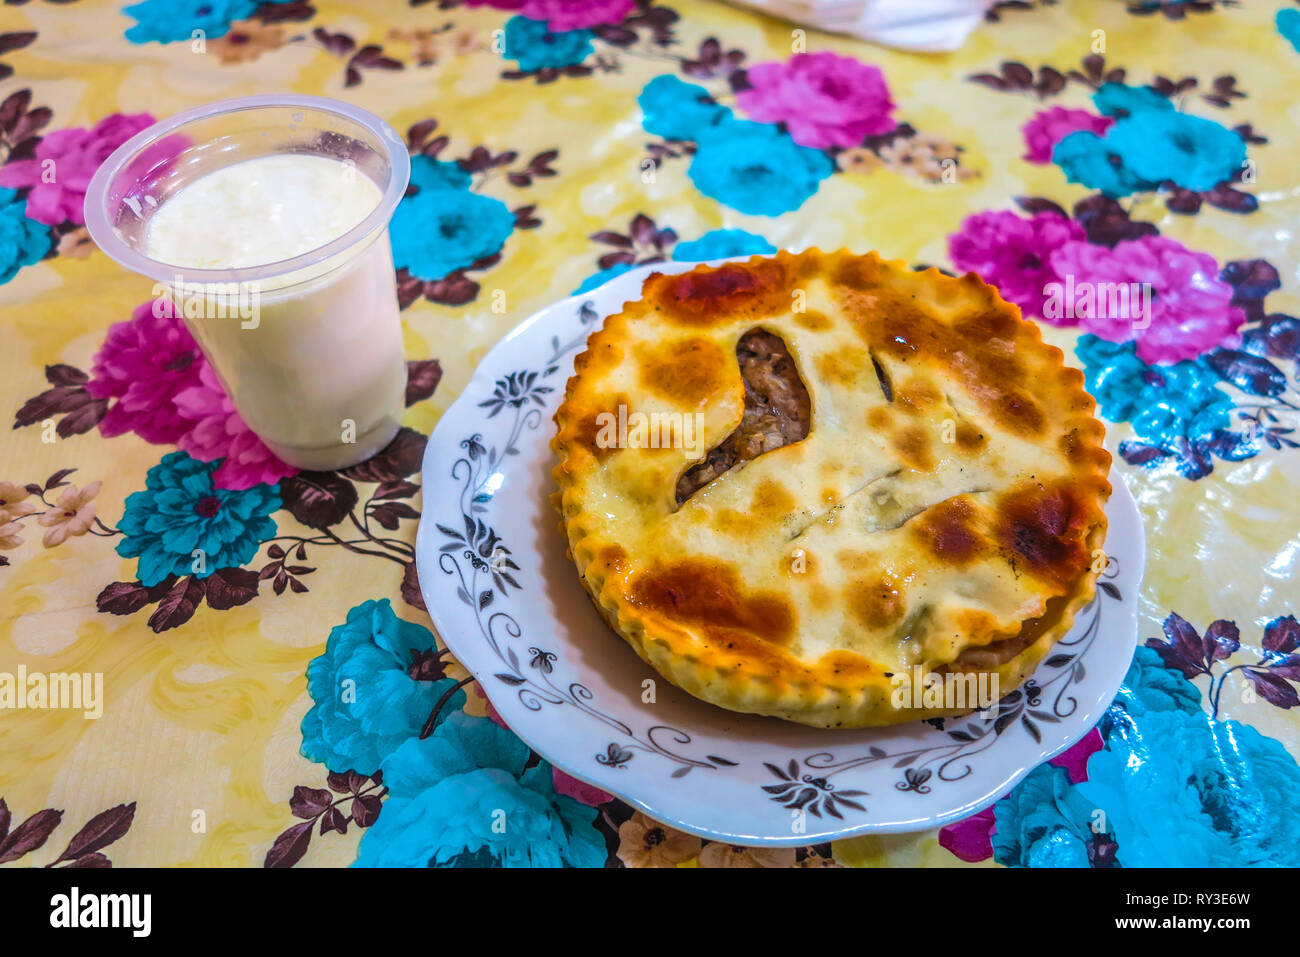 Turkmen Cuisine High Resolution Stock Photography And Images Alamy